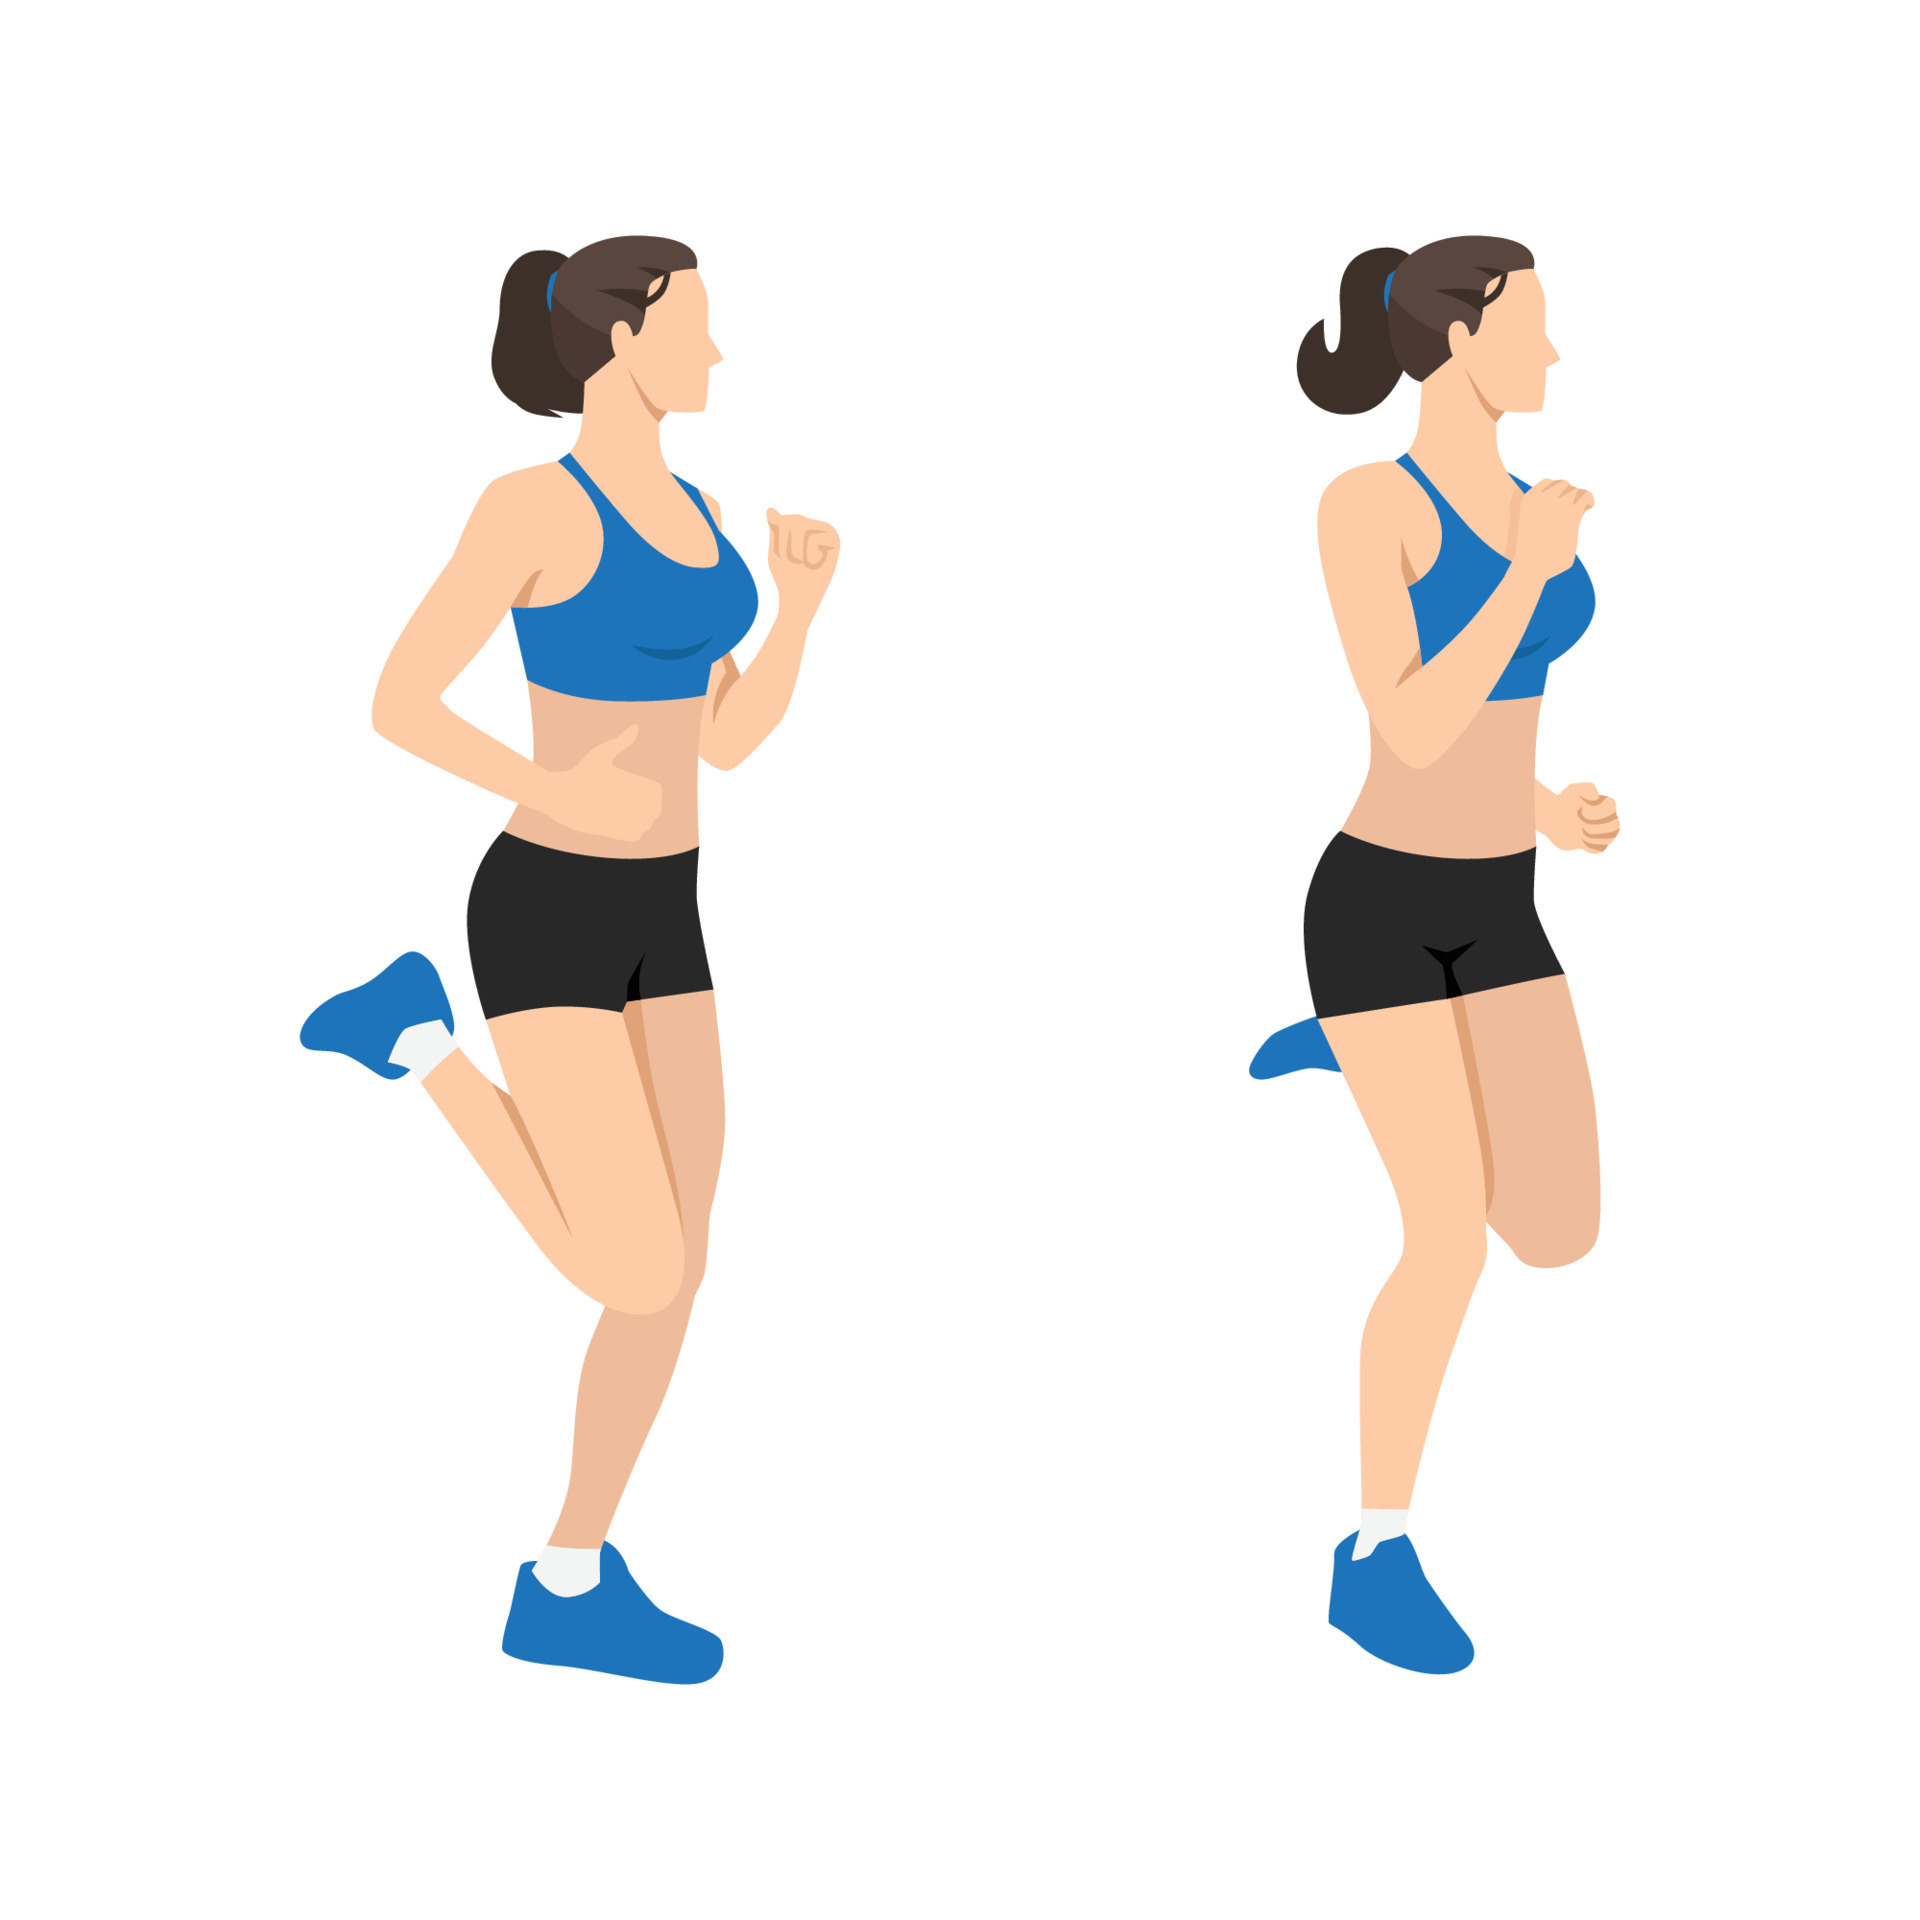 High knees. Front knee lifts. Run. and Jog on the spot exercise. vector illustration isolated on white background 8631432 Art at Vecteezy